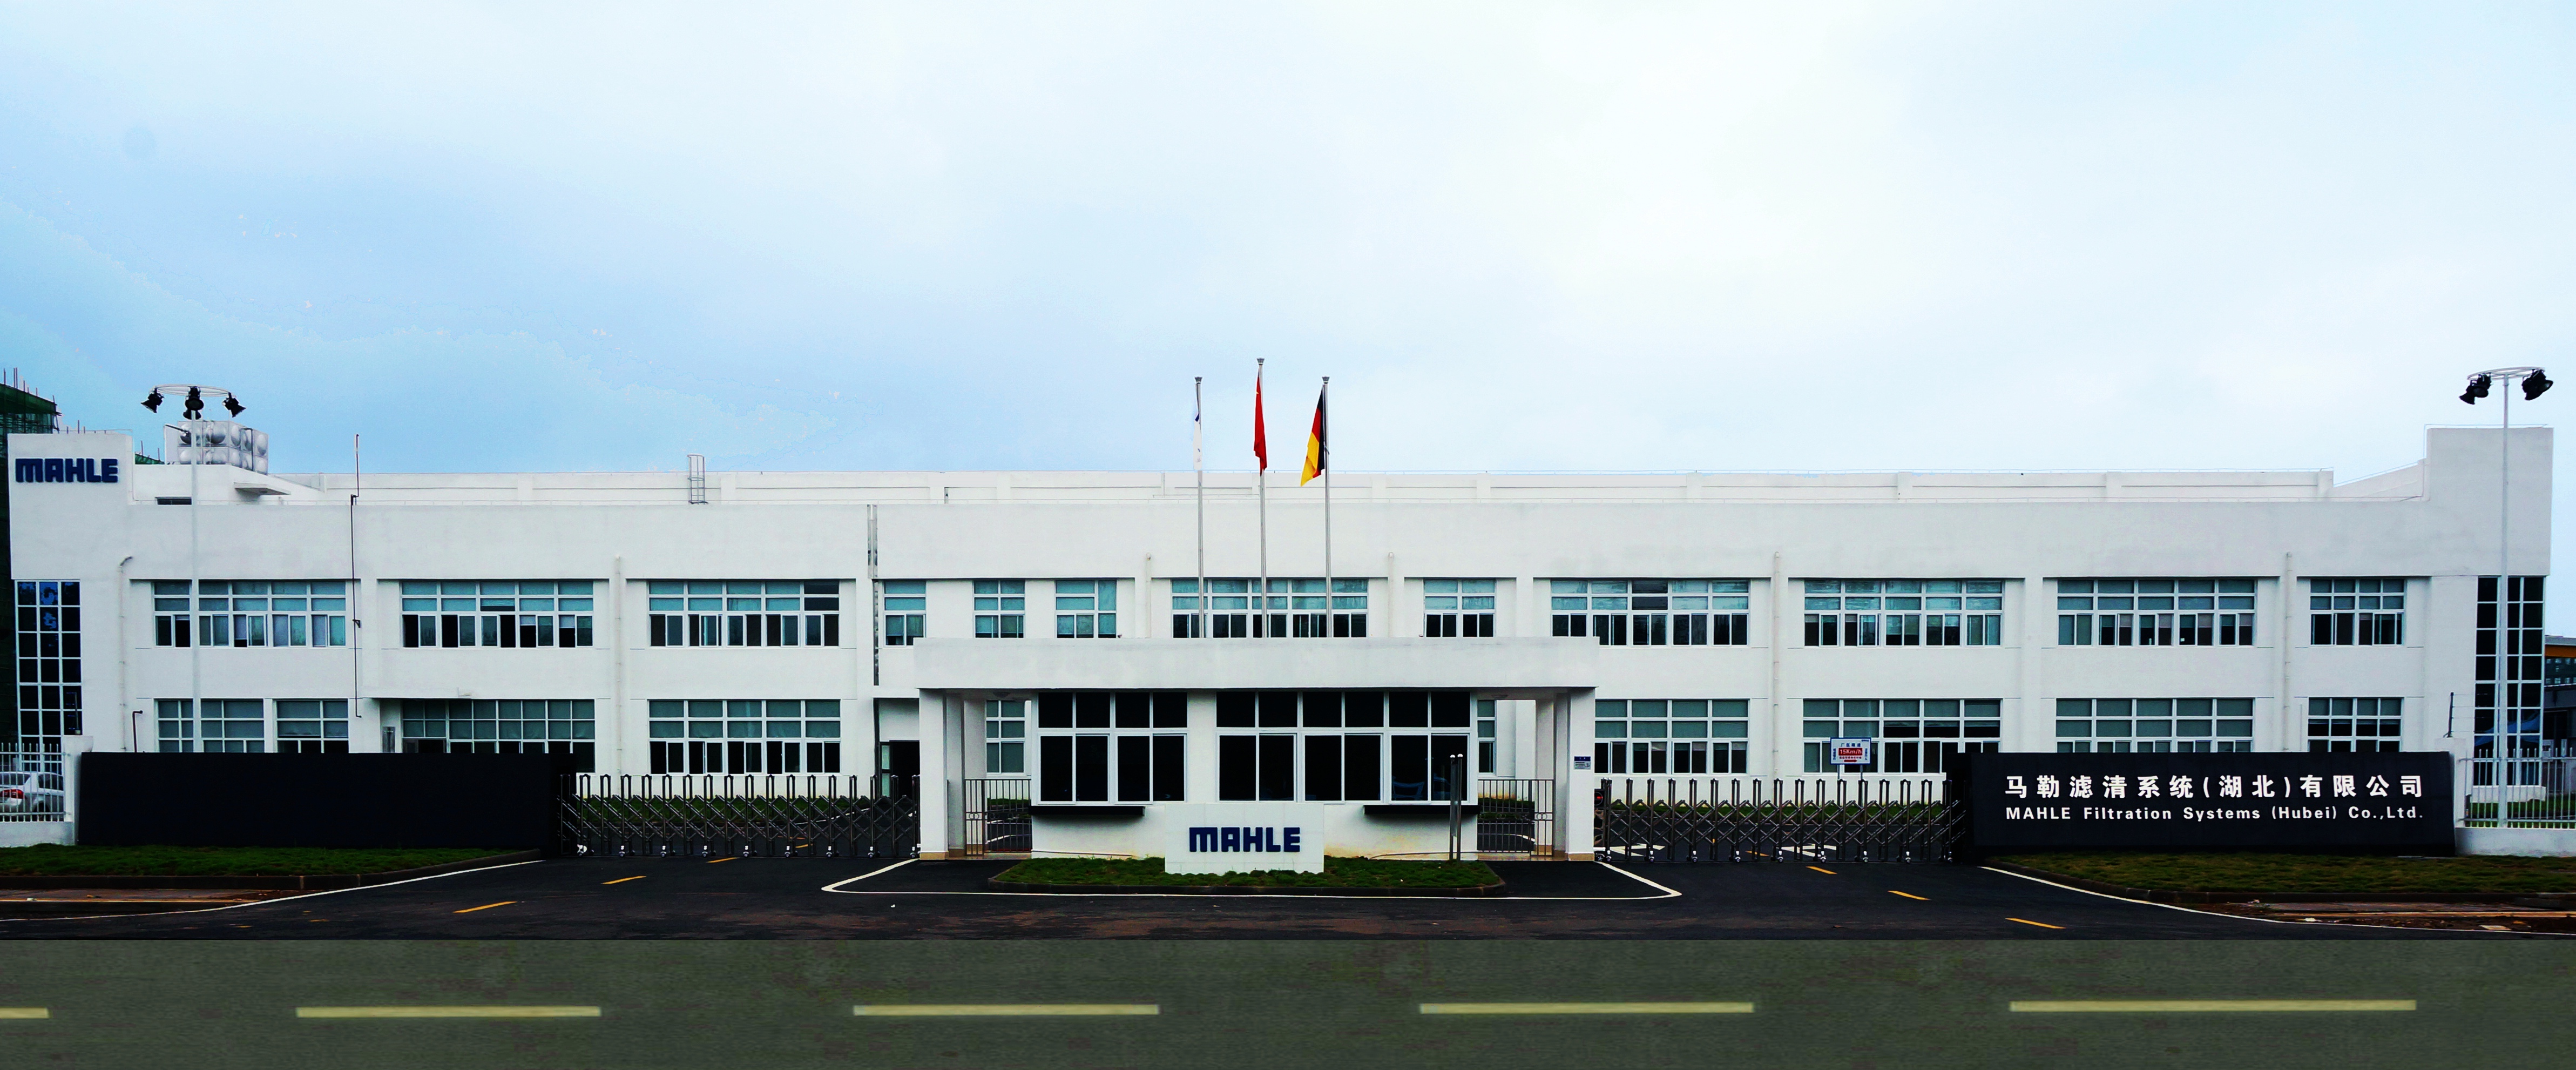 MAHLE Filtration Systems (Hubei) Co., Ltd., Wuhan